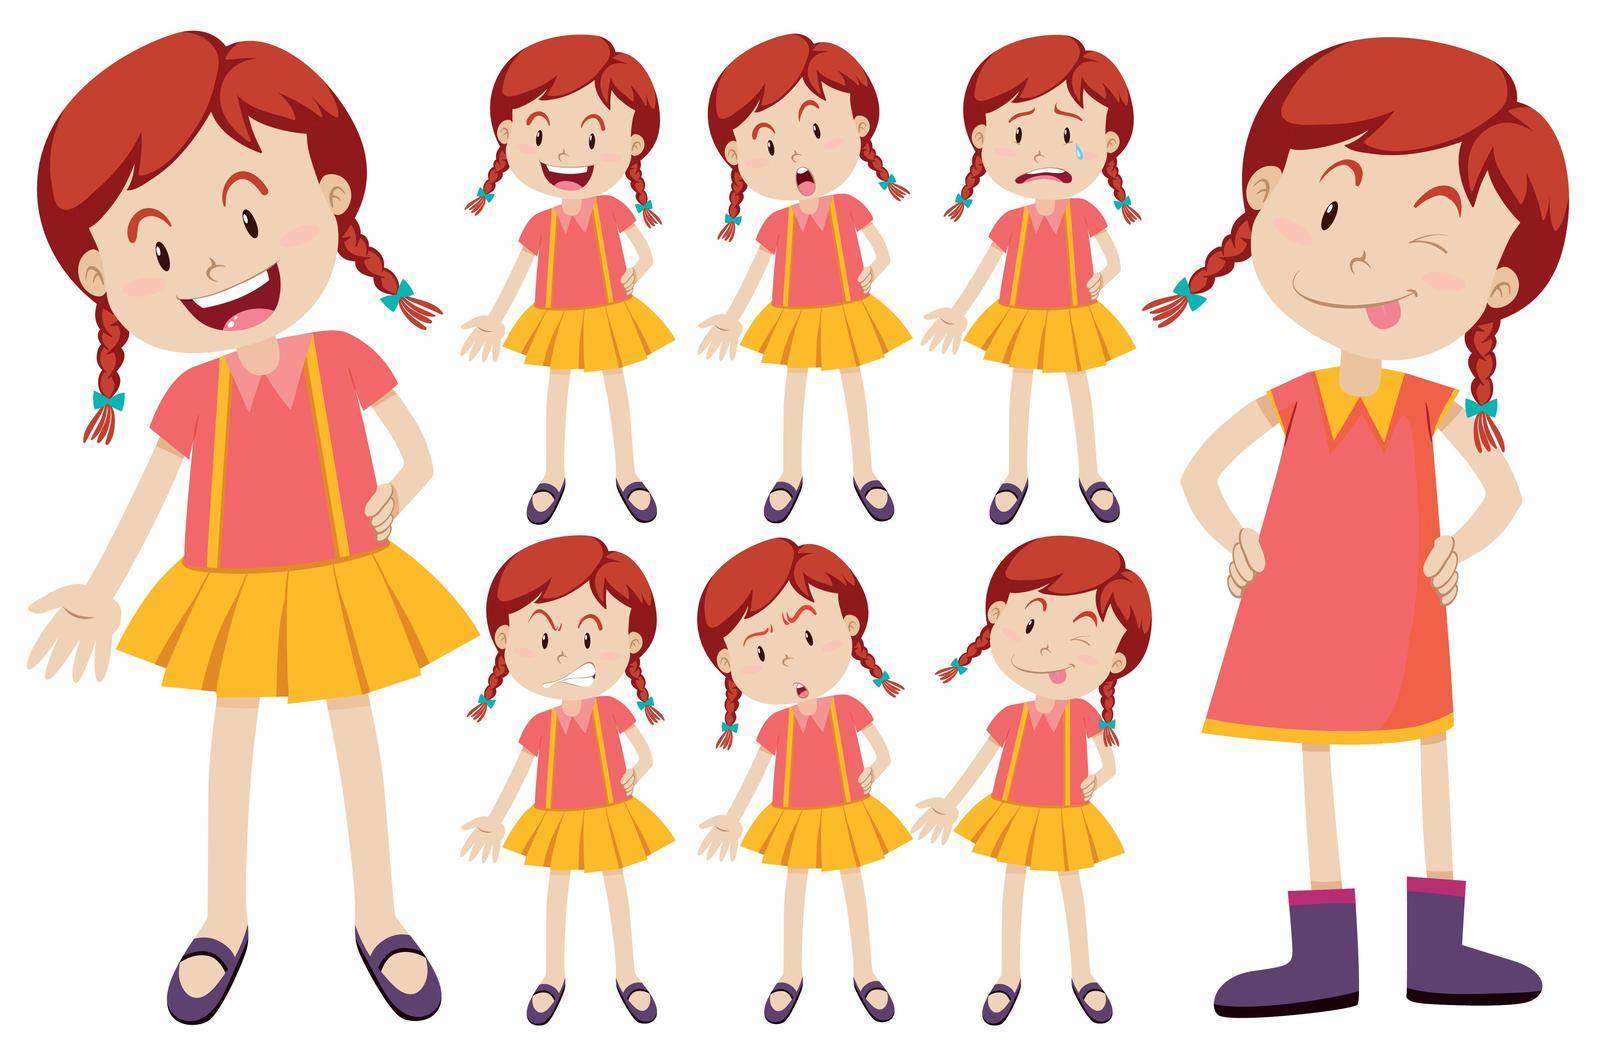 Girl with different facial expressions by iimages